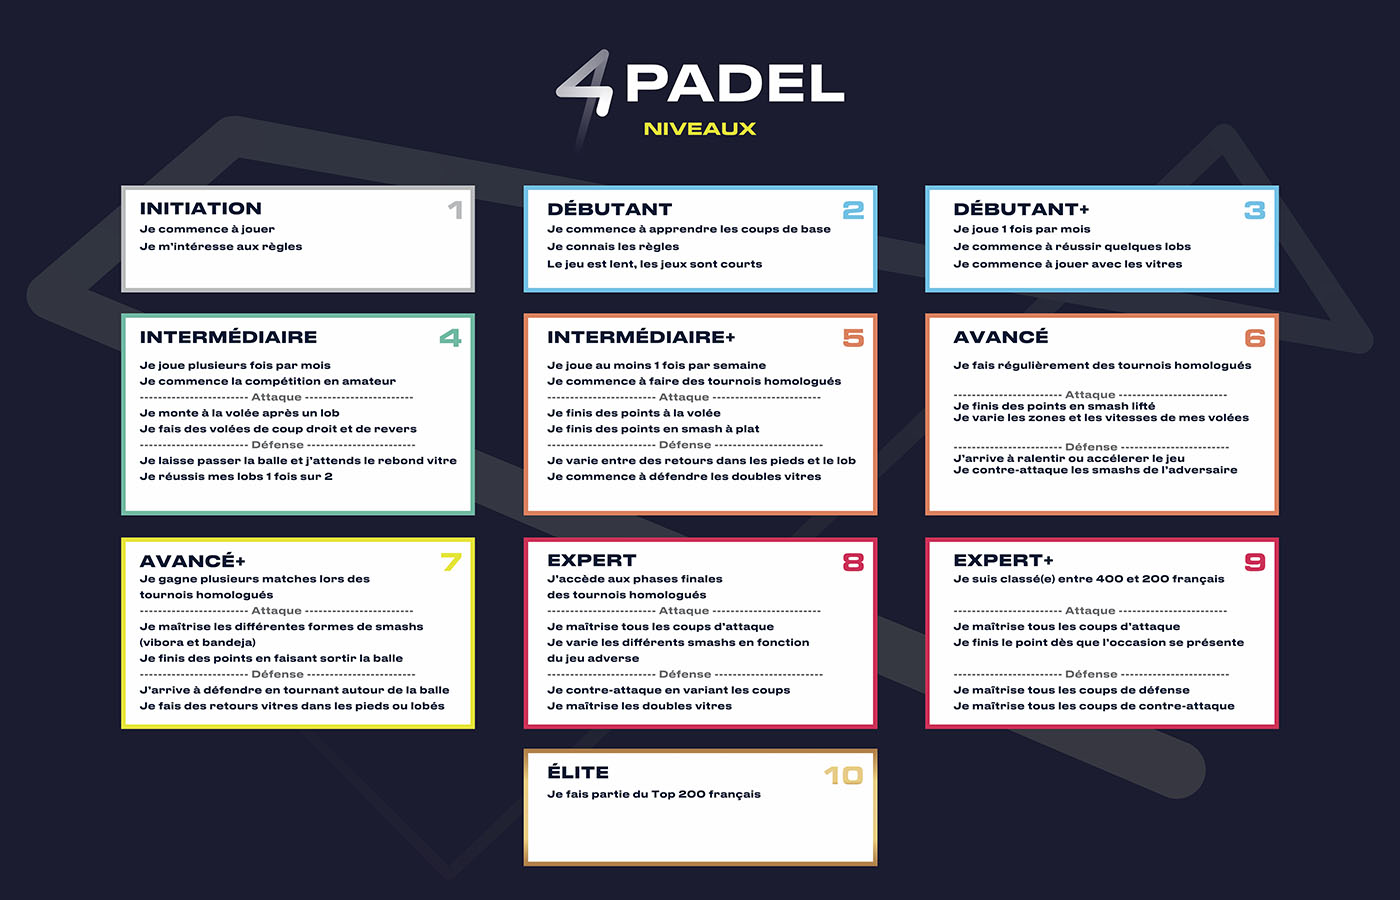 4PADEL News revisits the table of levels of Padel Around